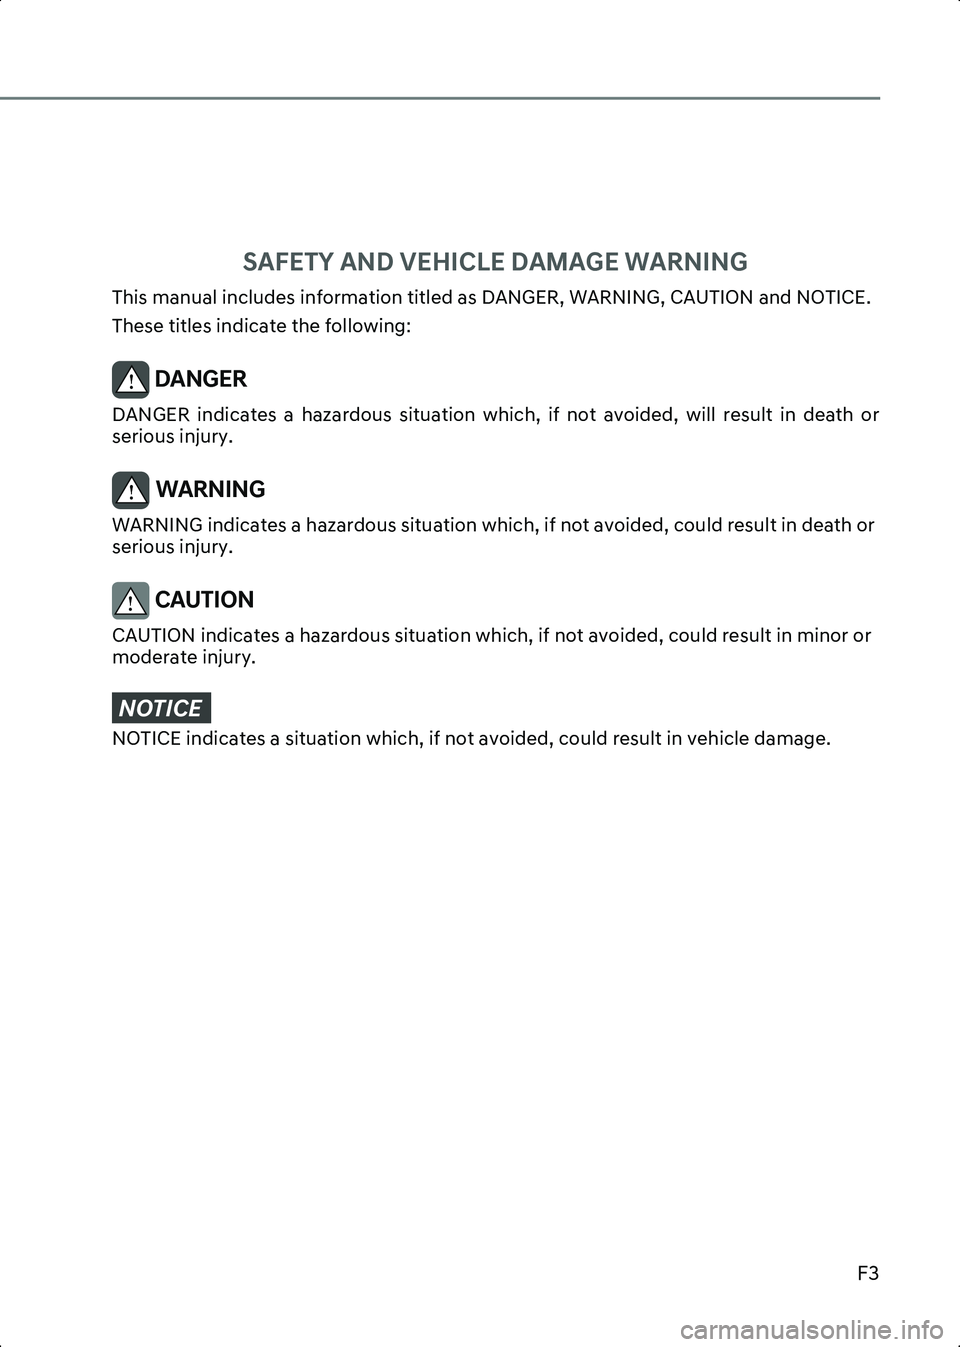 HYUNDAI IONIQ 6 2023  Owners Manual 01
F3
SAFETY AND VEHICLE DAMAGE WARNING
This manual includes information titled as DANGER, WARNING, CAUTION and NOTICE.
These titles indicate the following:
DANGER DANGER  indicates  a  hazardous  sit